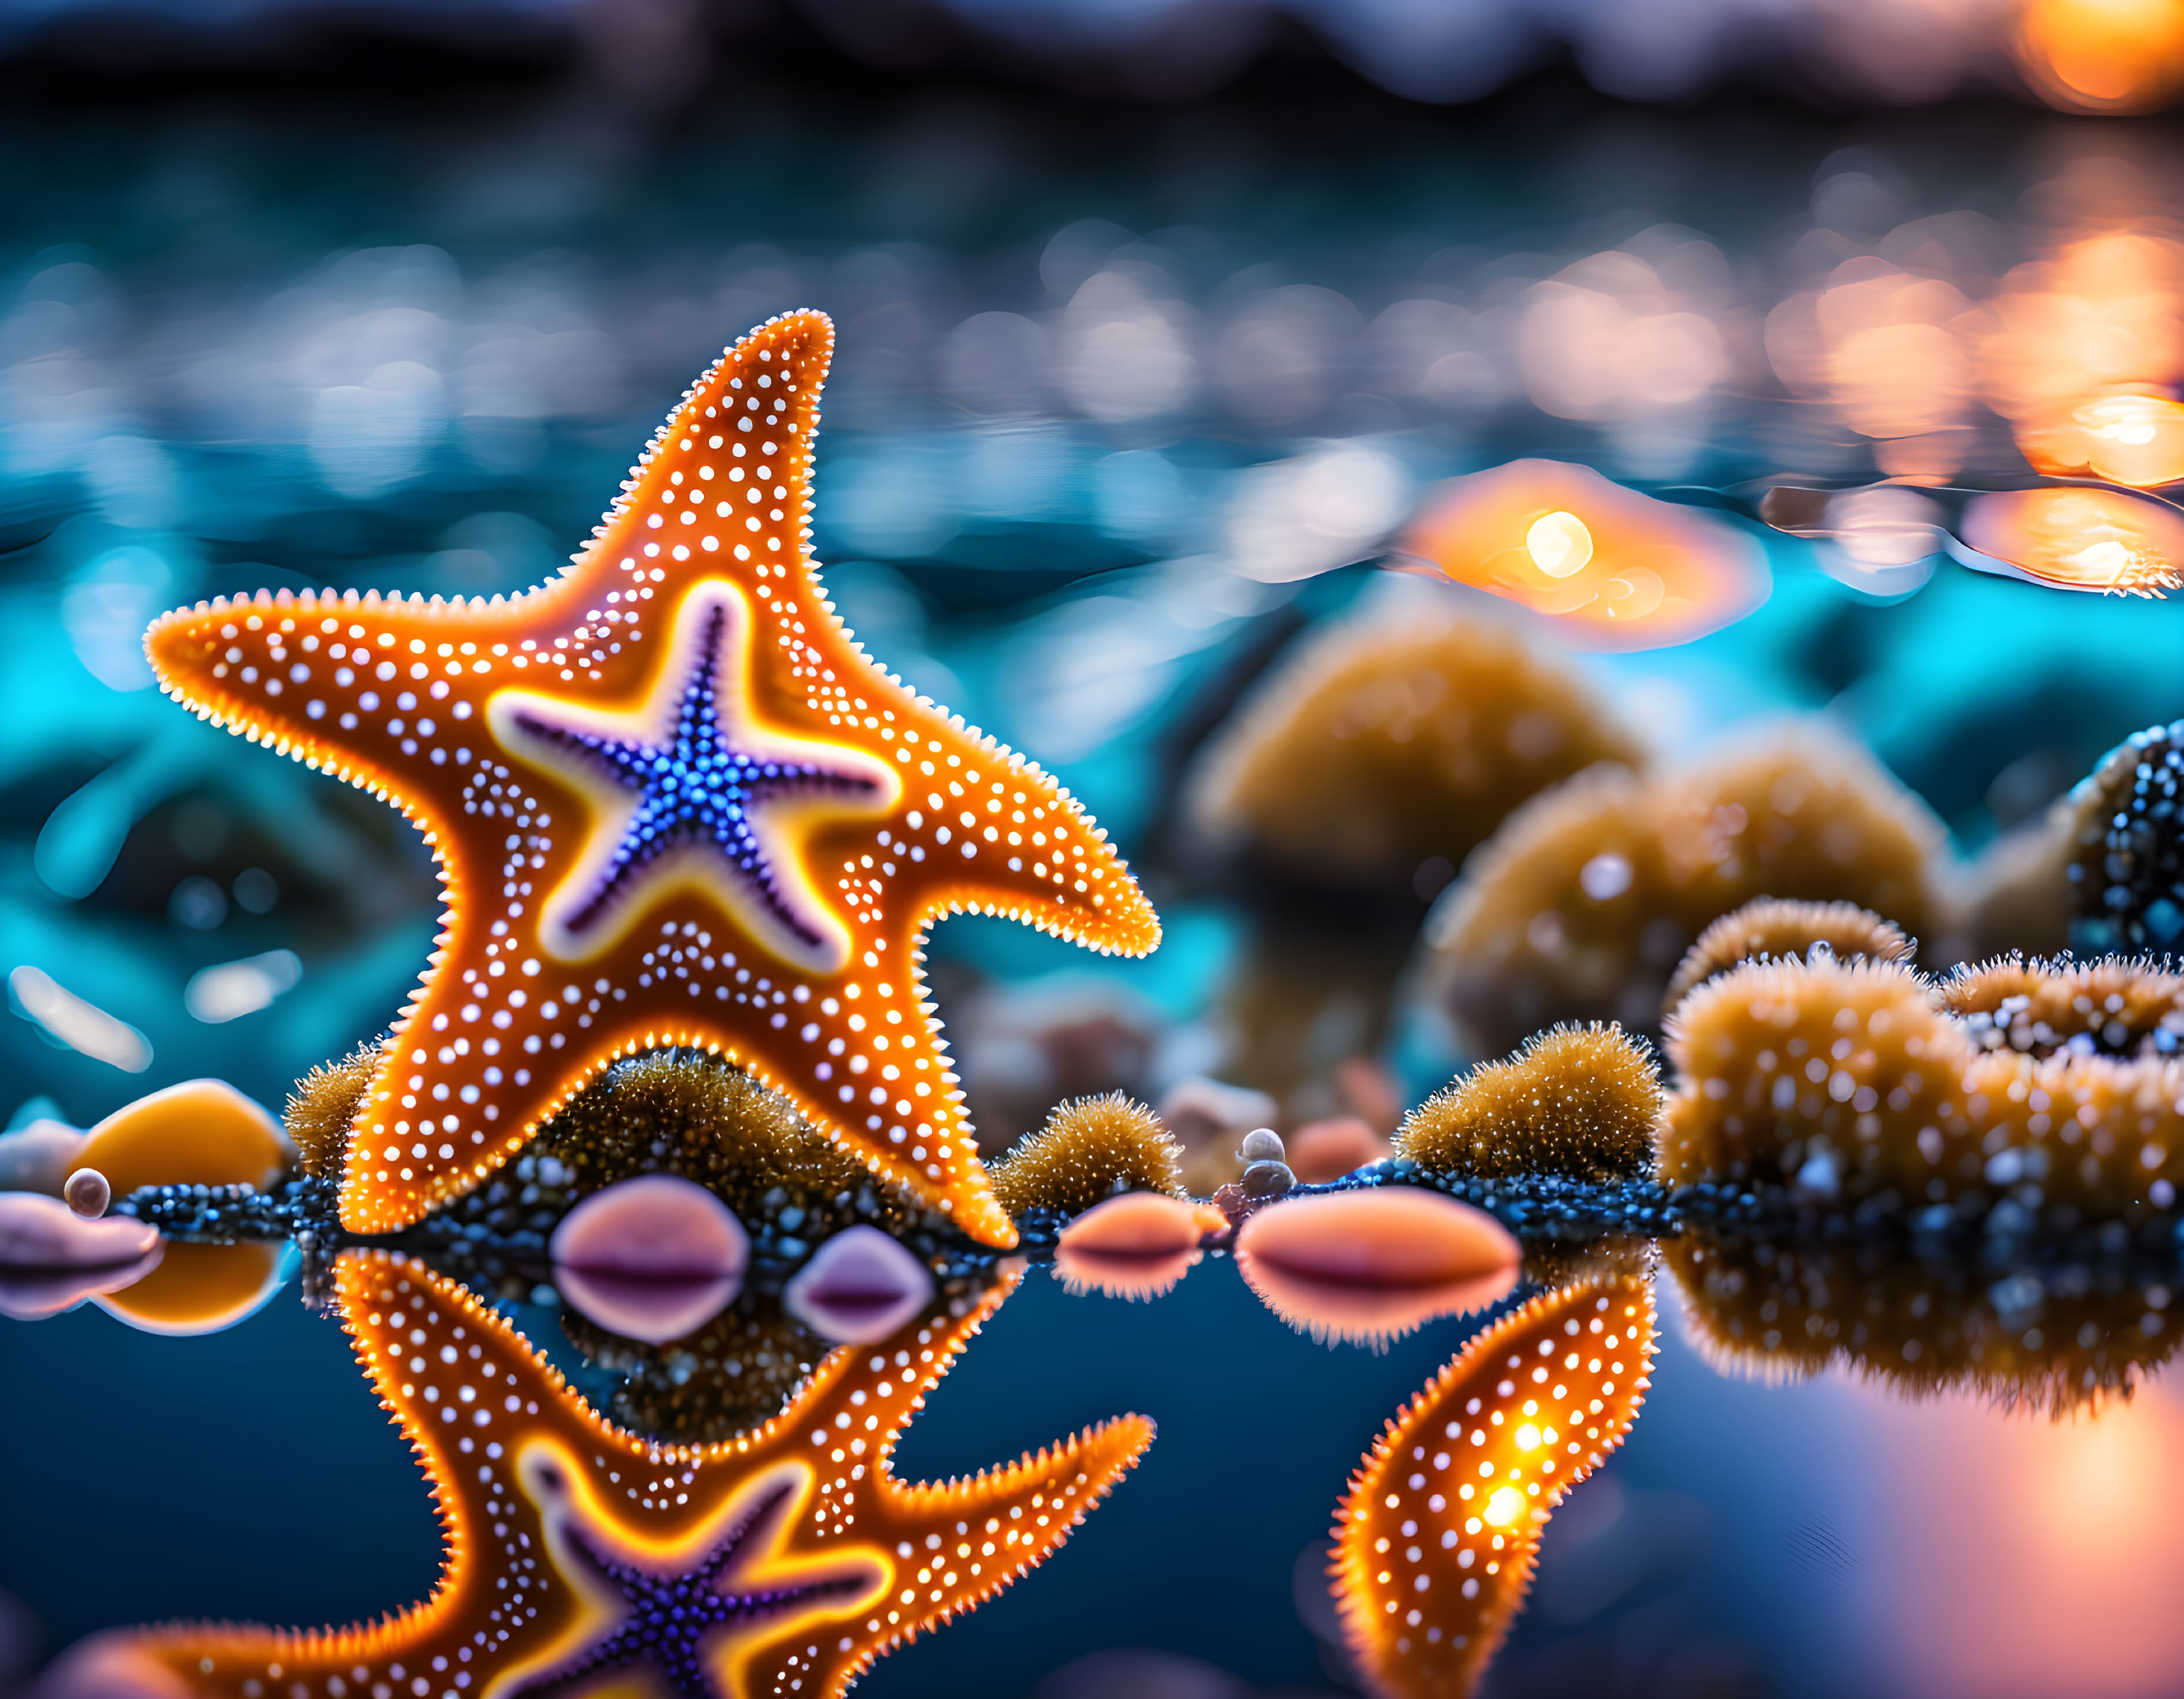 Orange Starfish with White Spots on Reflective Surface with Blurred Water and Bokeh Lights